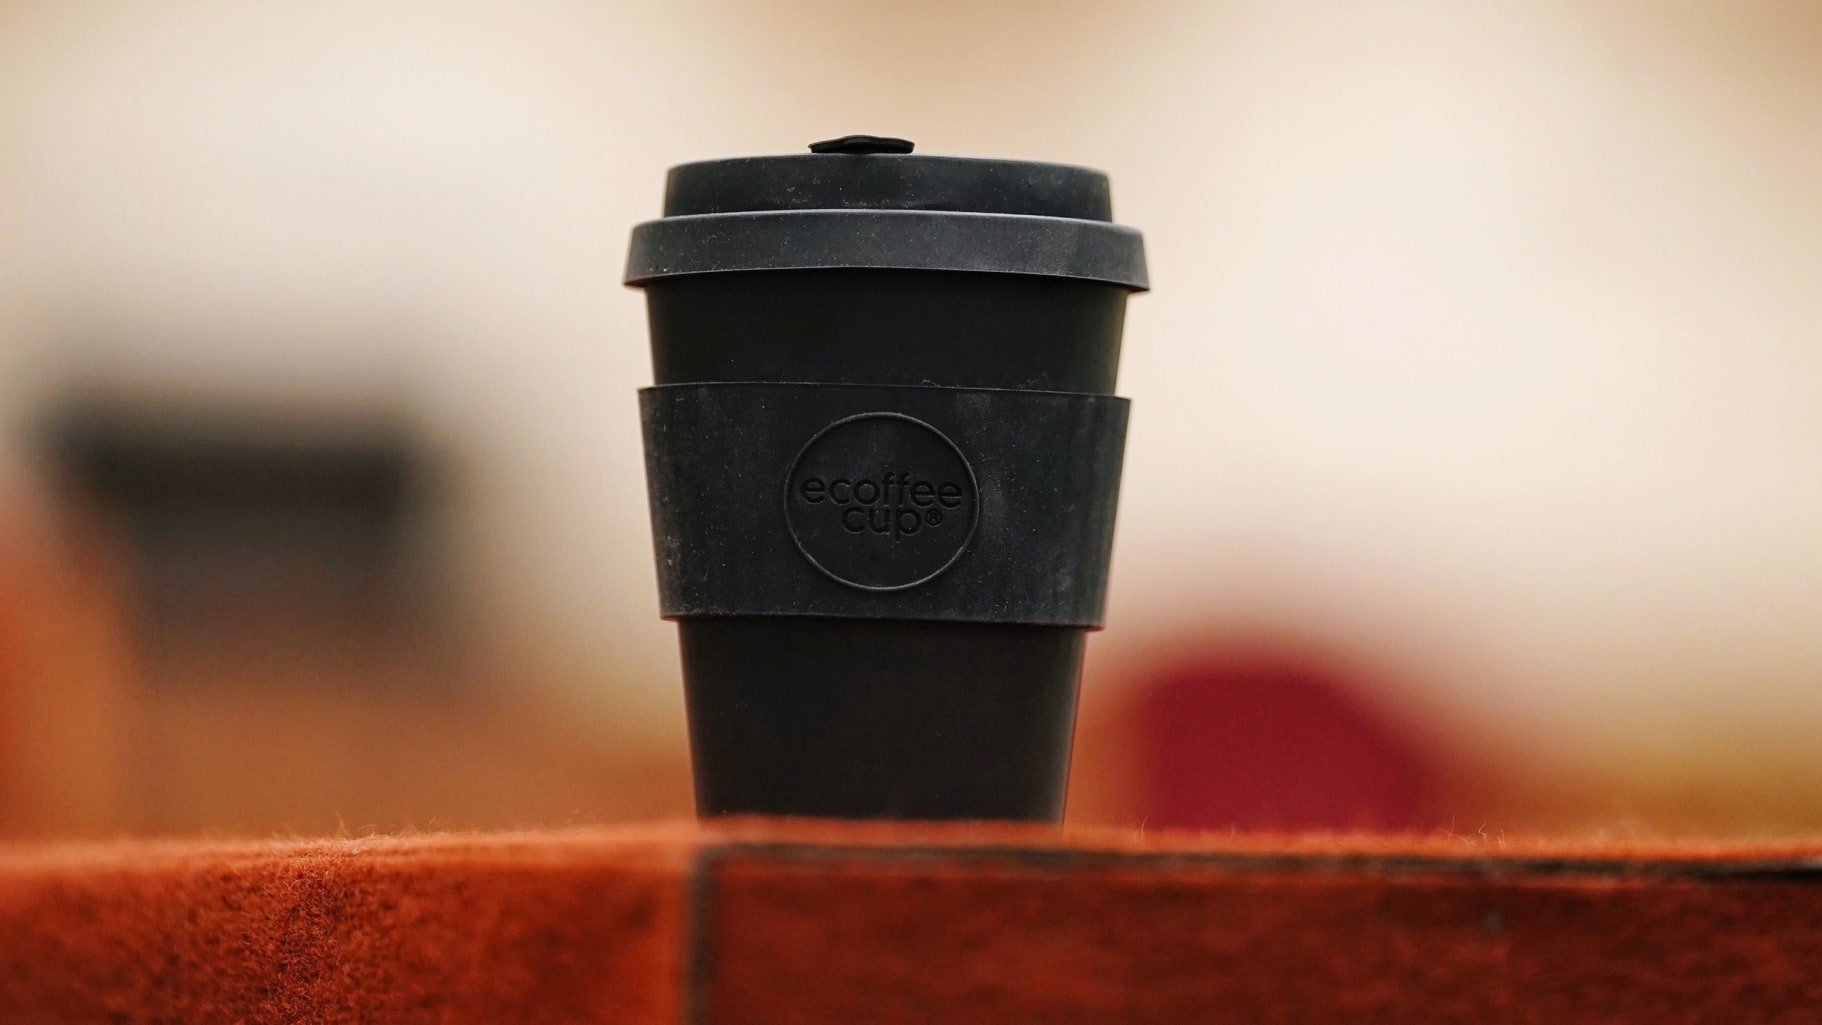 Black reusable Ecoffee cup on a red brick wall